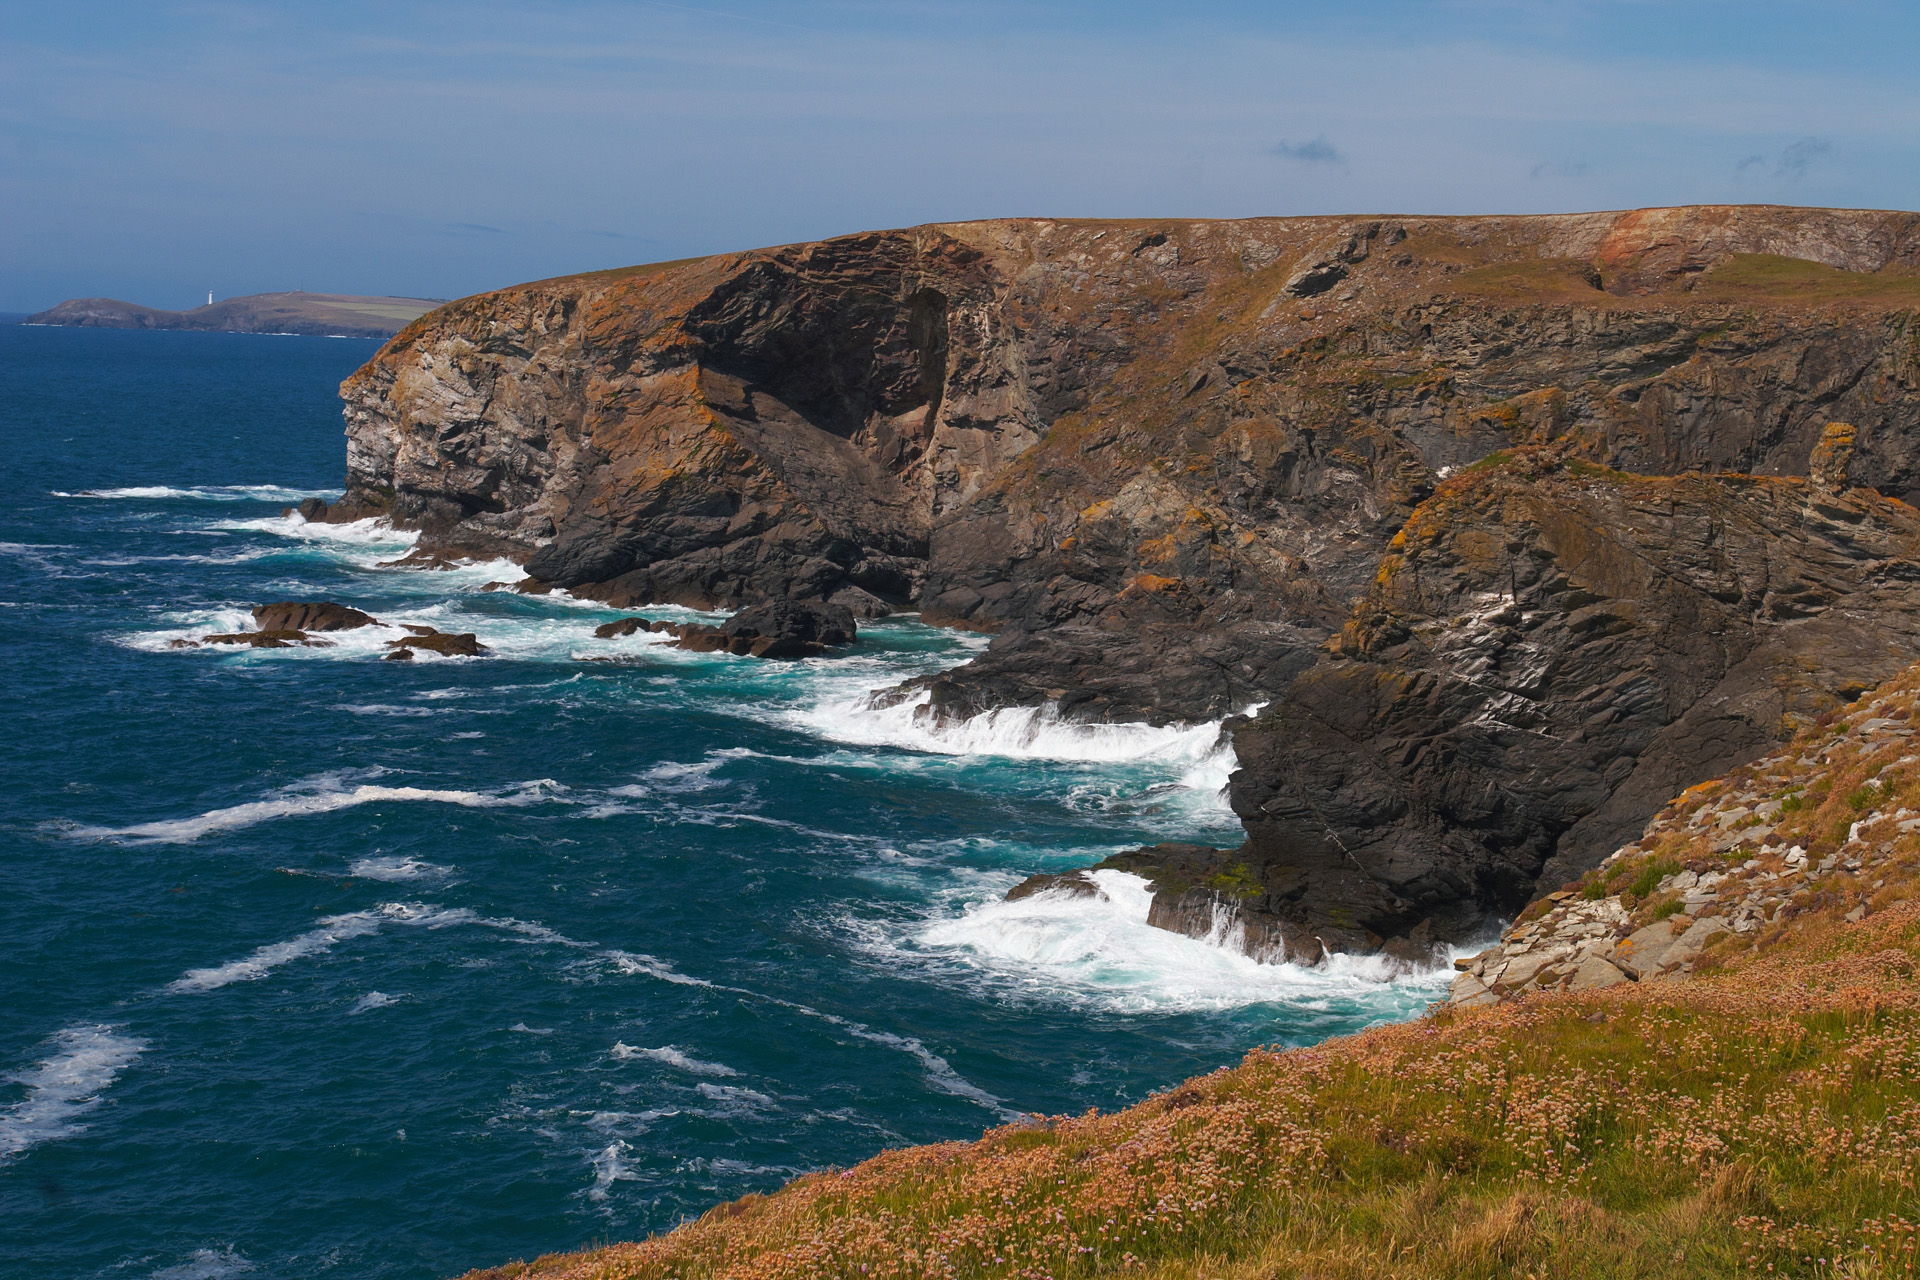 High Cove from near Park Head, between Bedruthan Steps and Portc